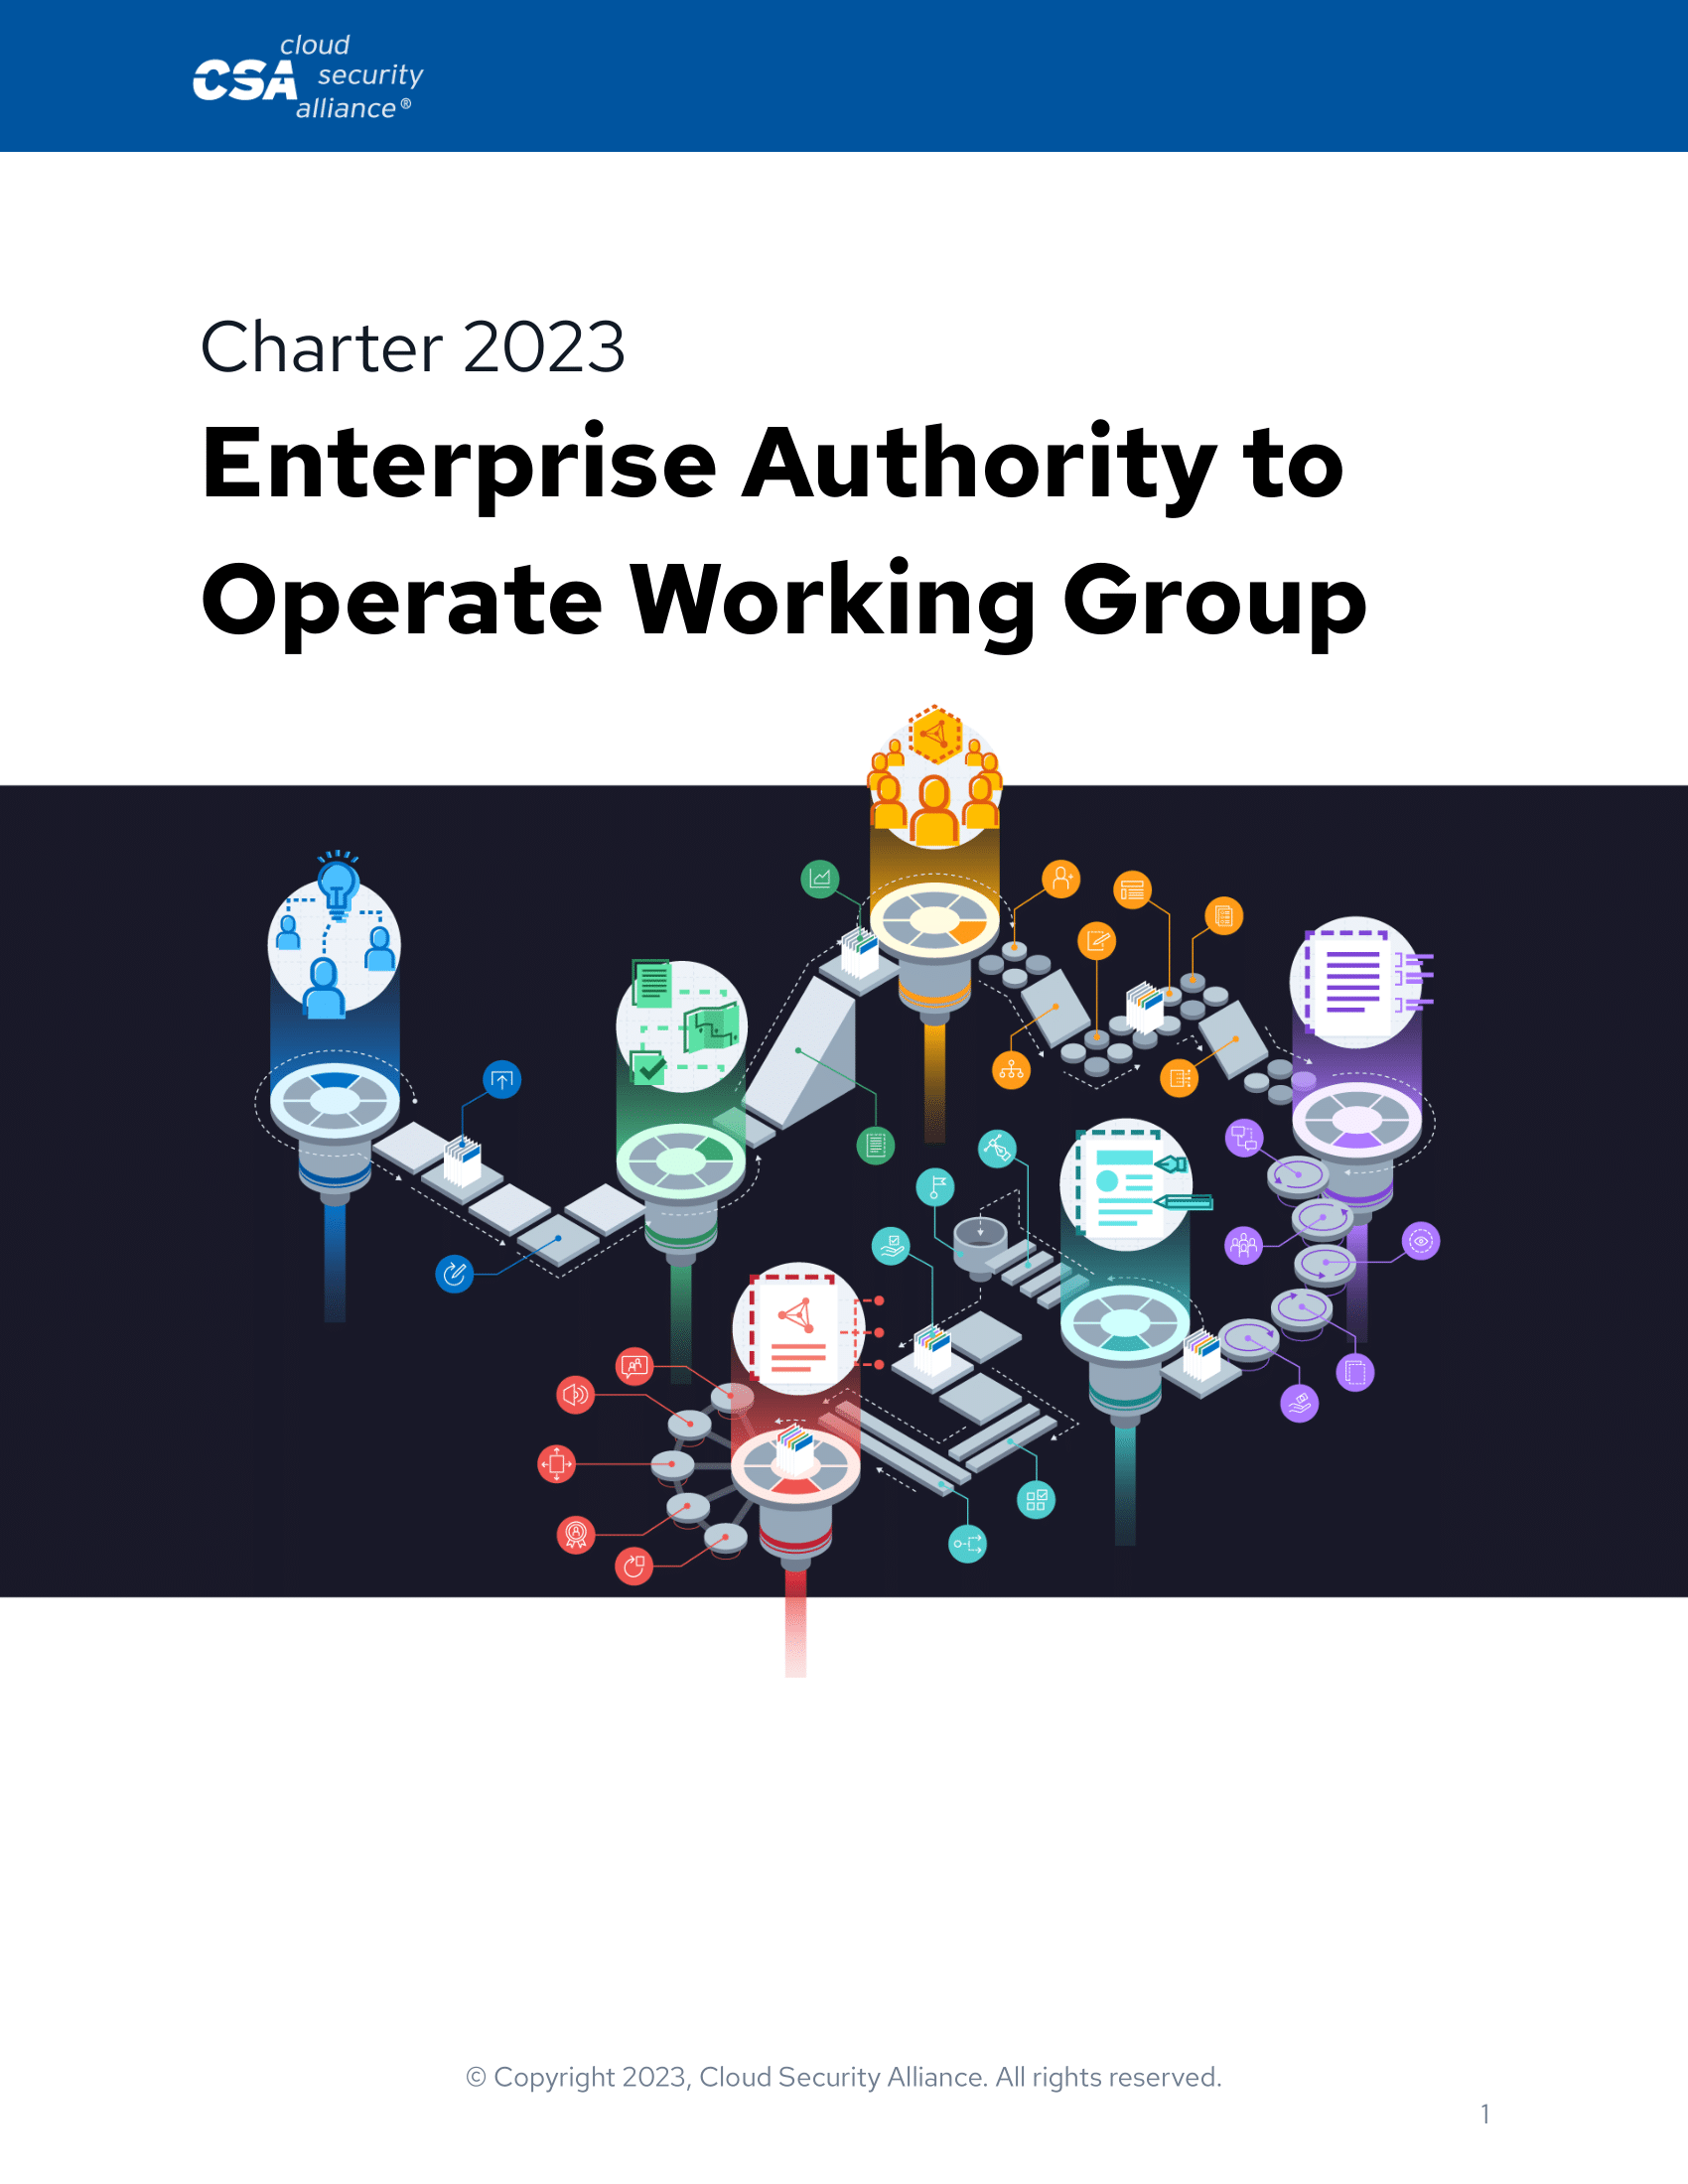 Enterprise Authority to Operate Working Group Charter 2023